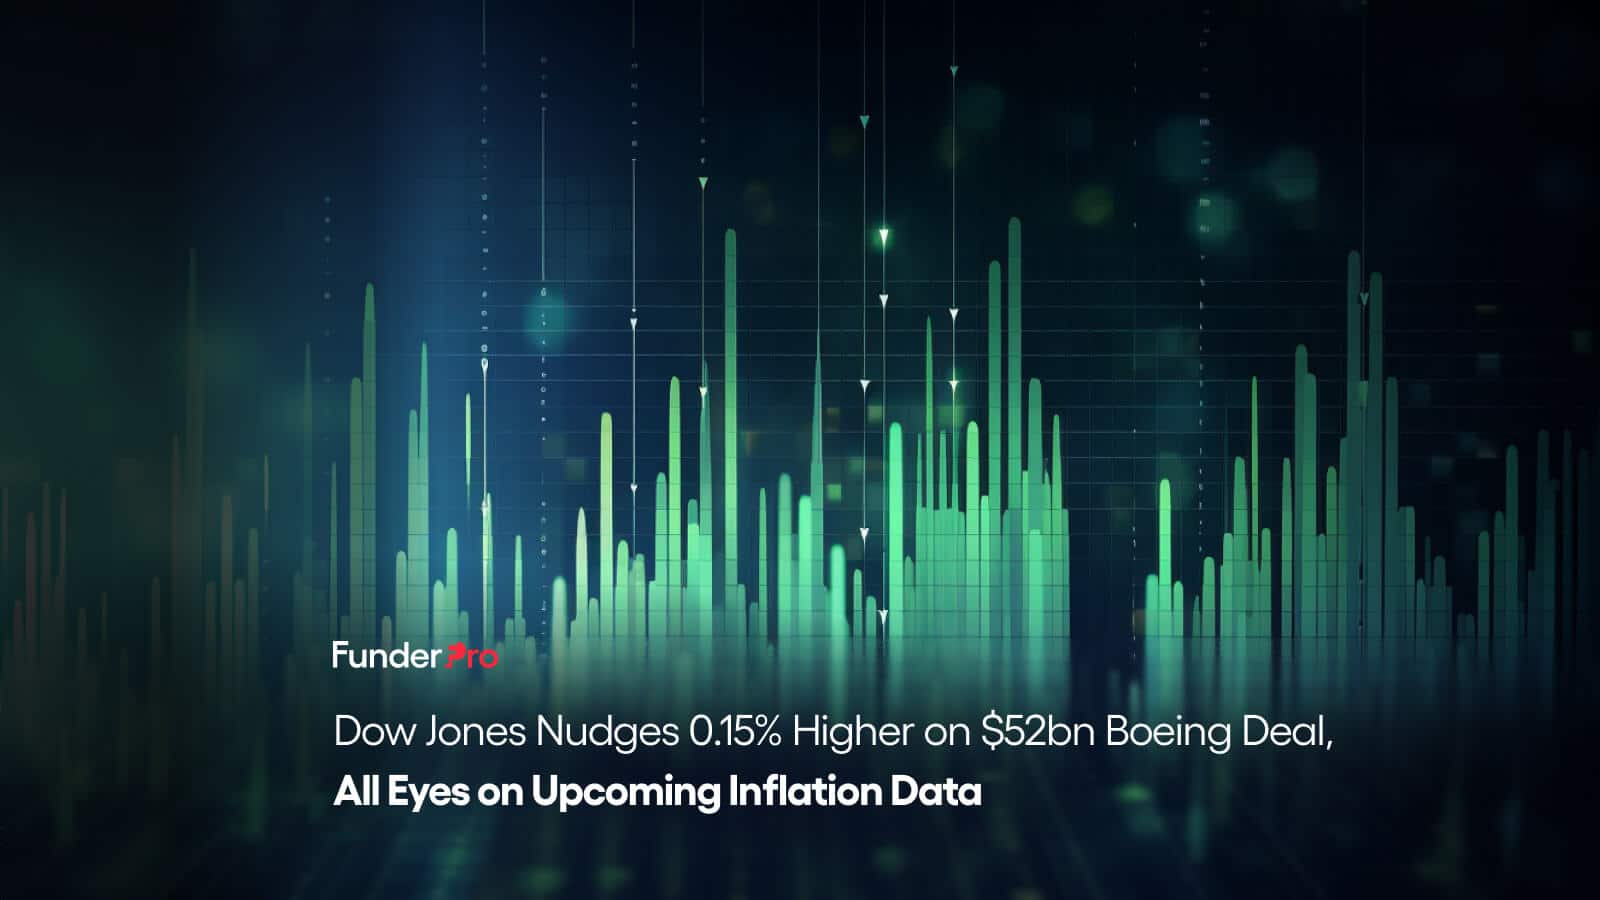 Dow Jones Nudges 0.15% Higher on $52bn Boeing Deal, All Eyes on Upcoming Inflation Data